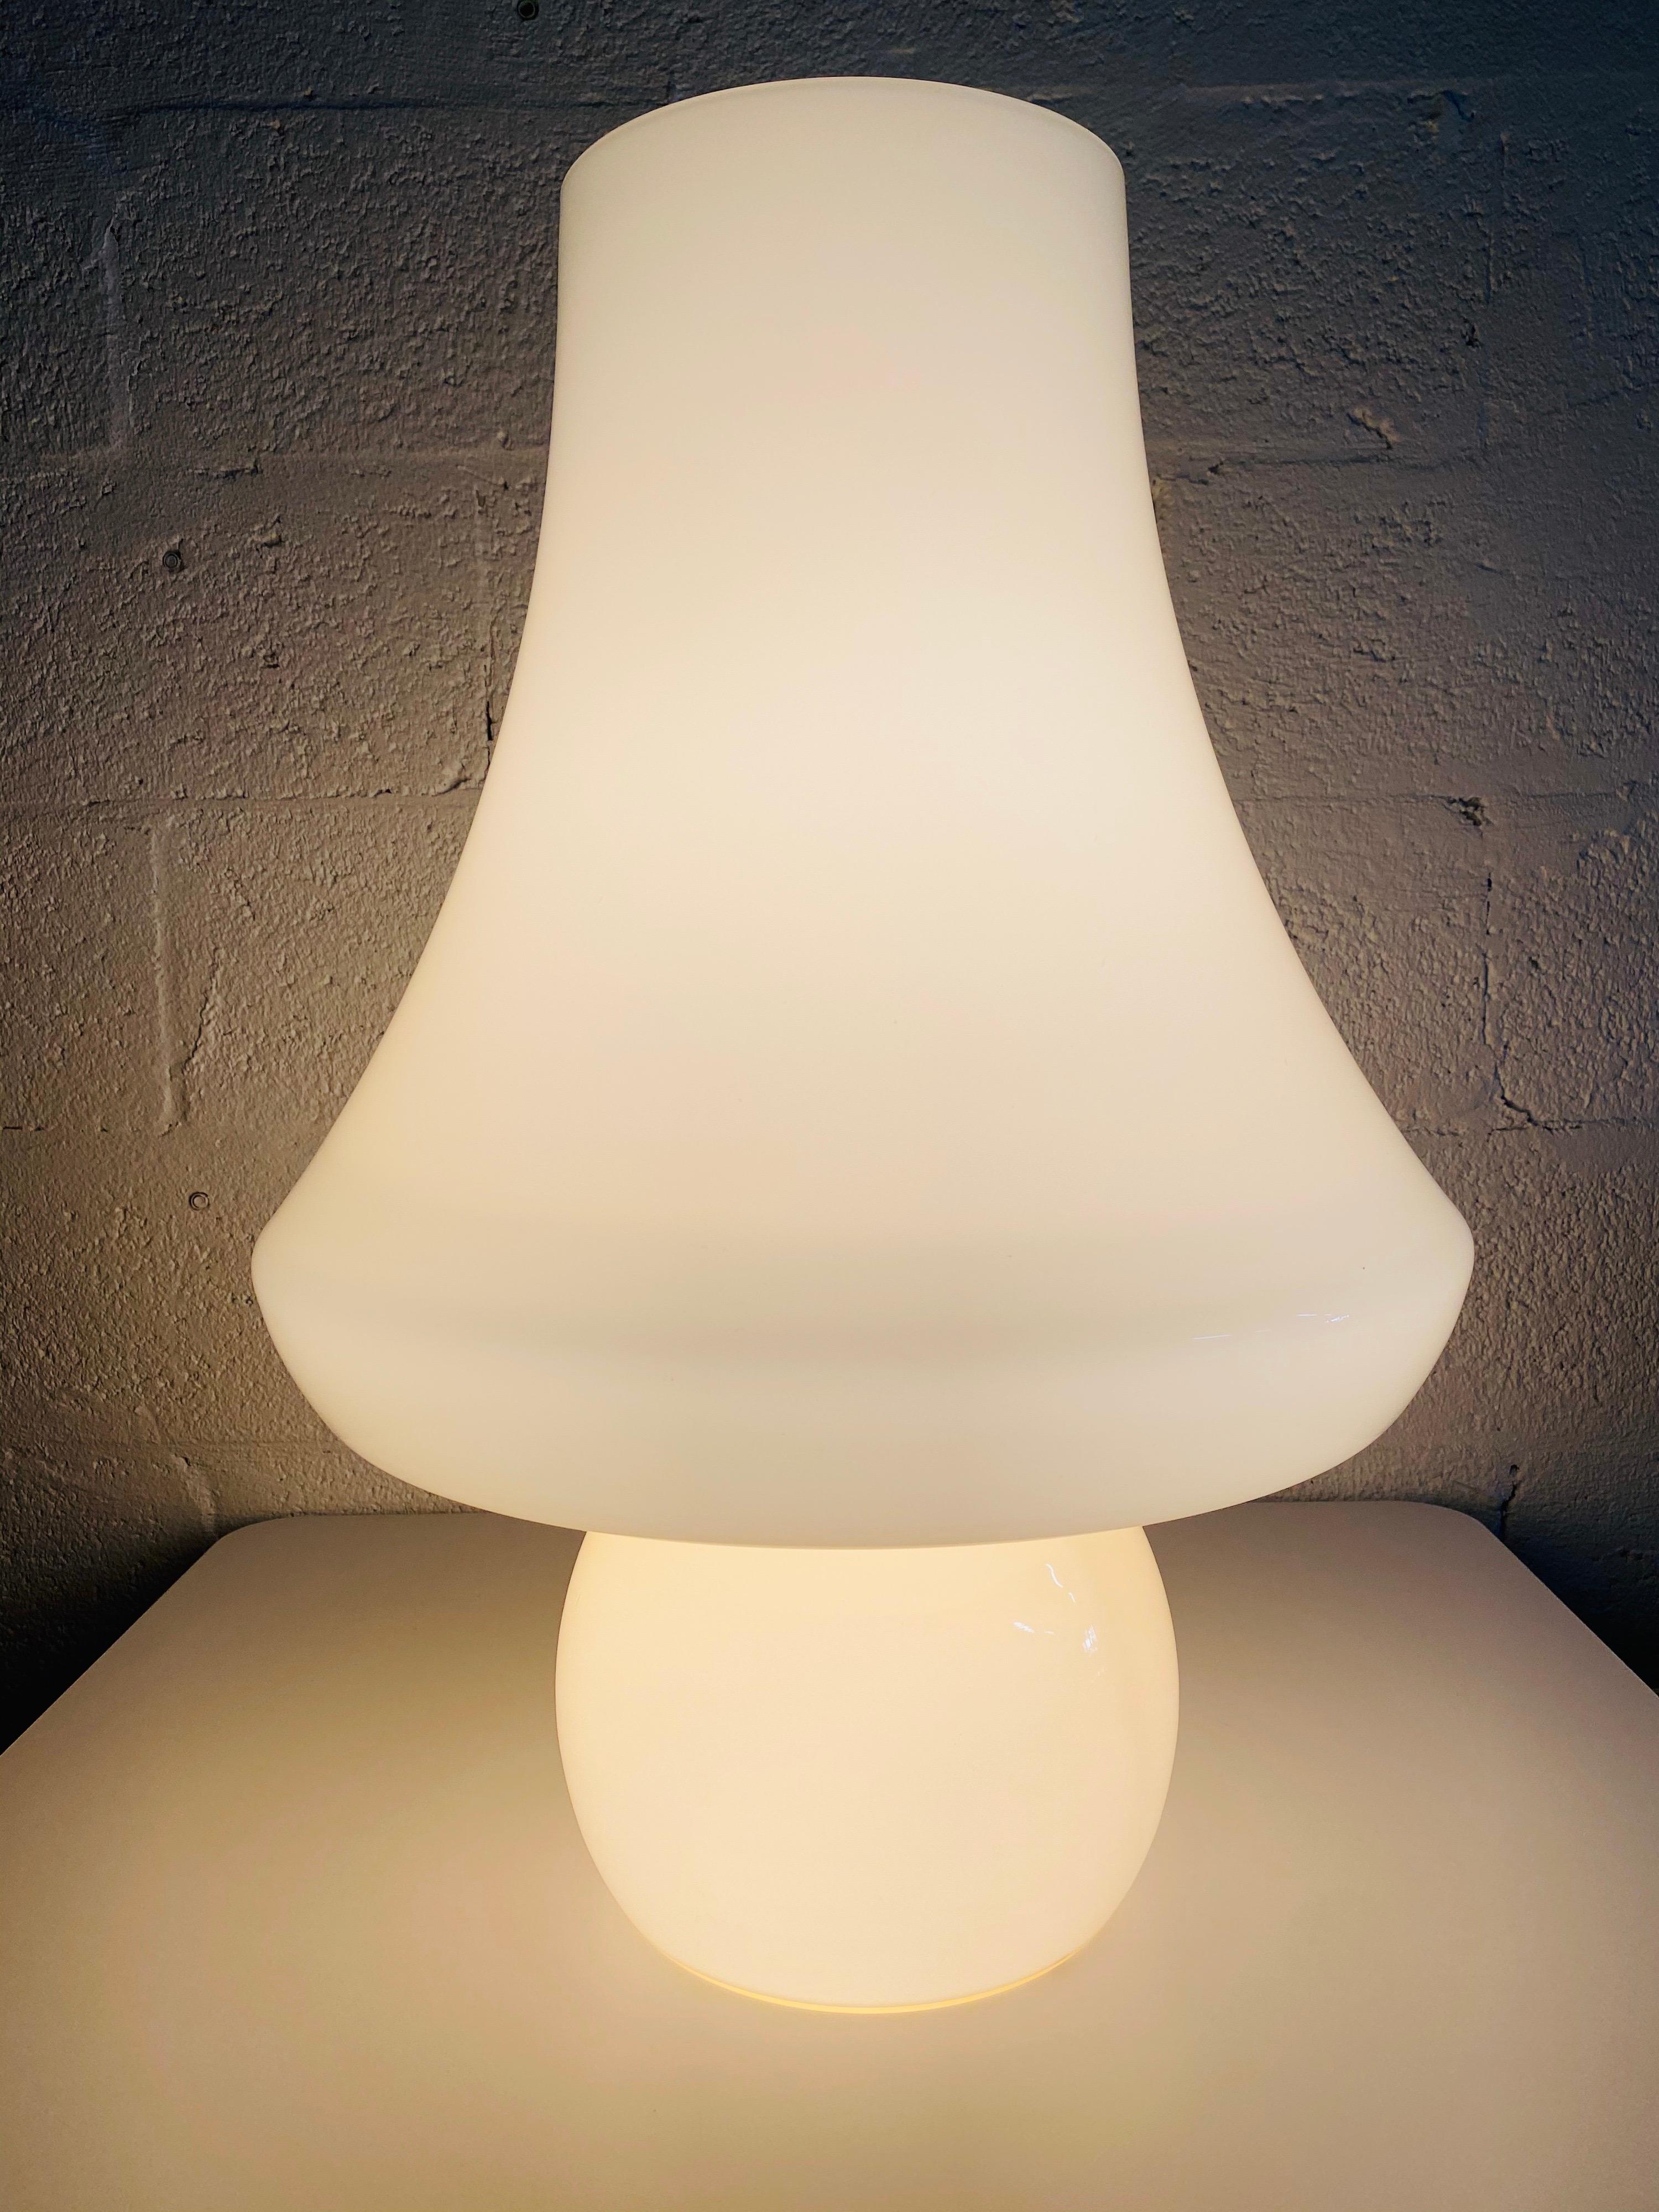 Italian Murano glass mushroom lamp from the 1970s. Glass is a creamy white color with two bulbs and double on/off toggle switch.